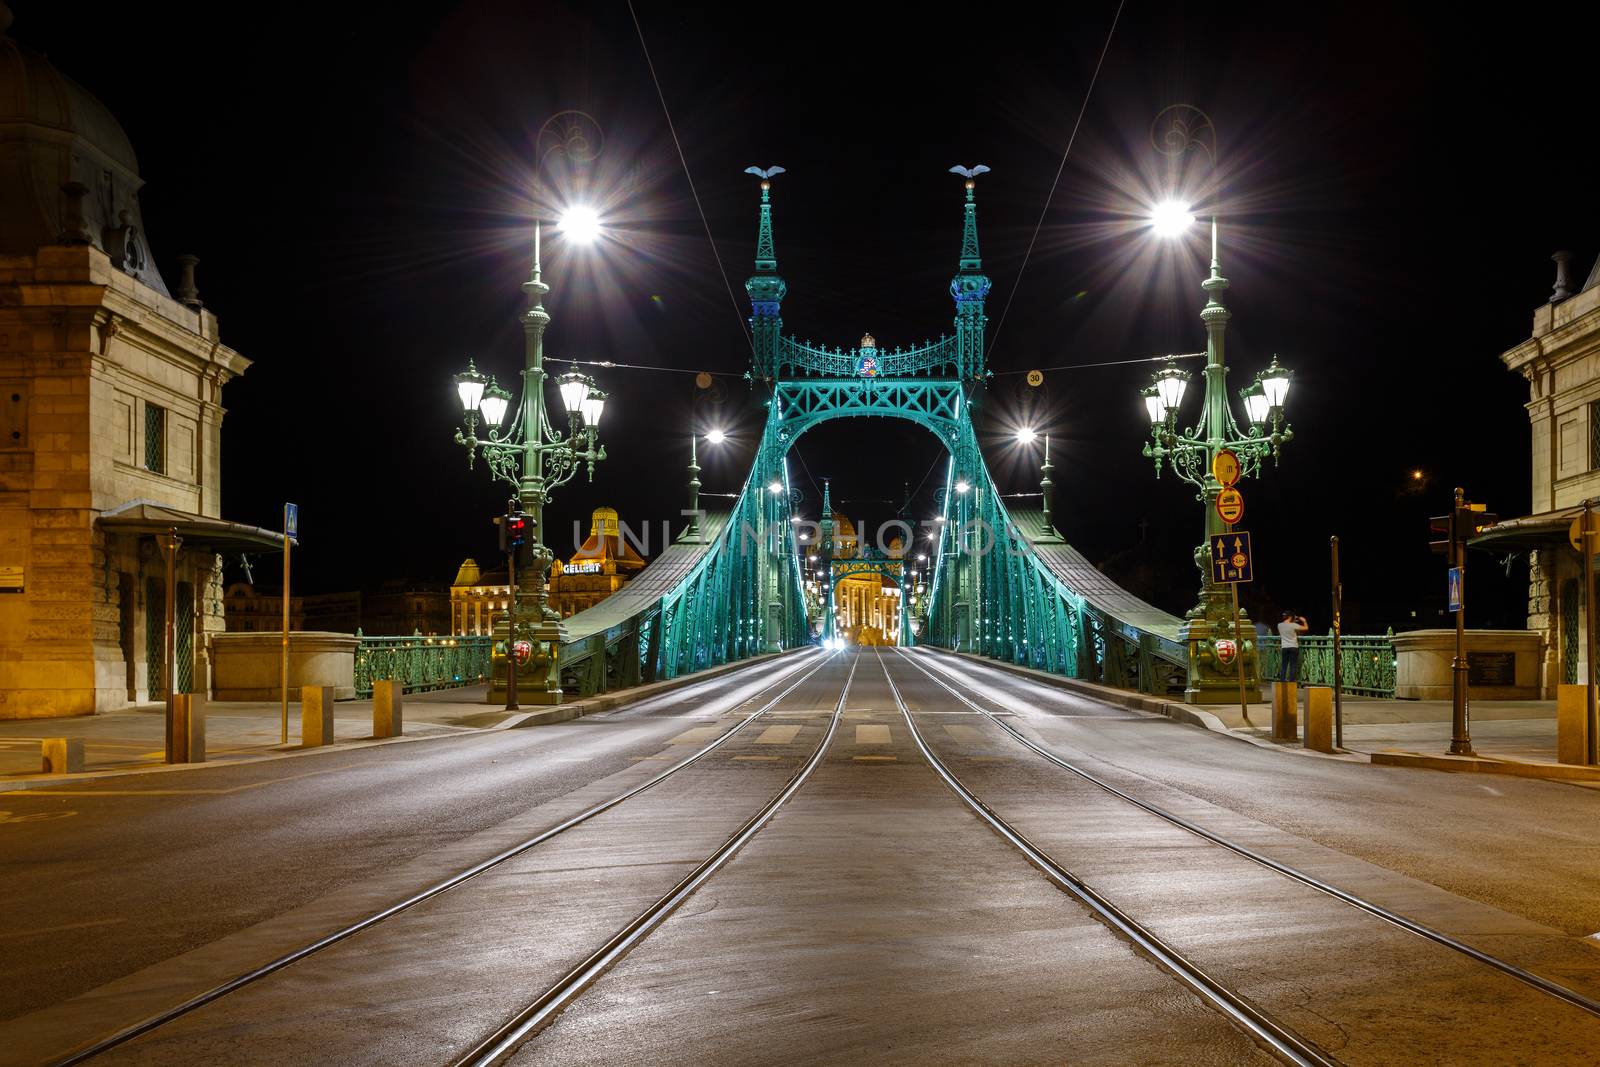 The Freedom bridge in Budapest Hungary by night.